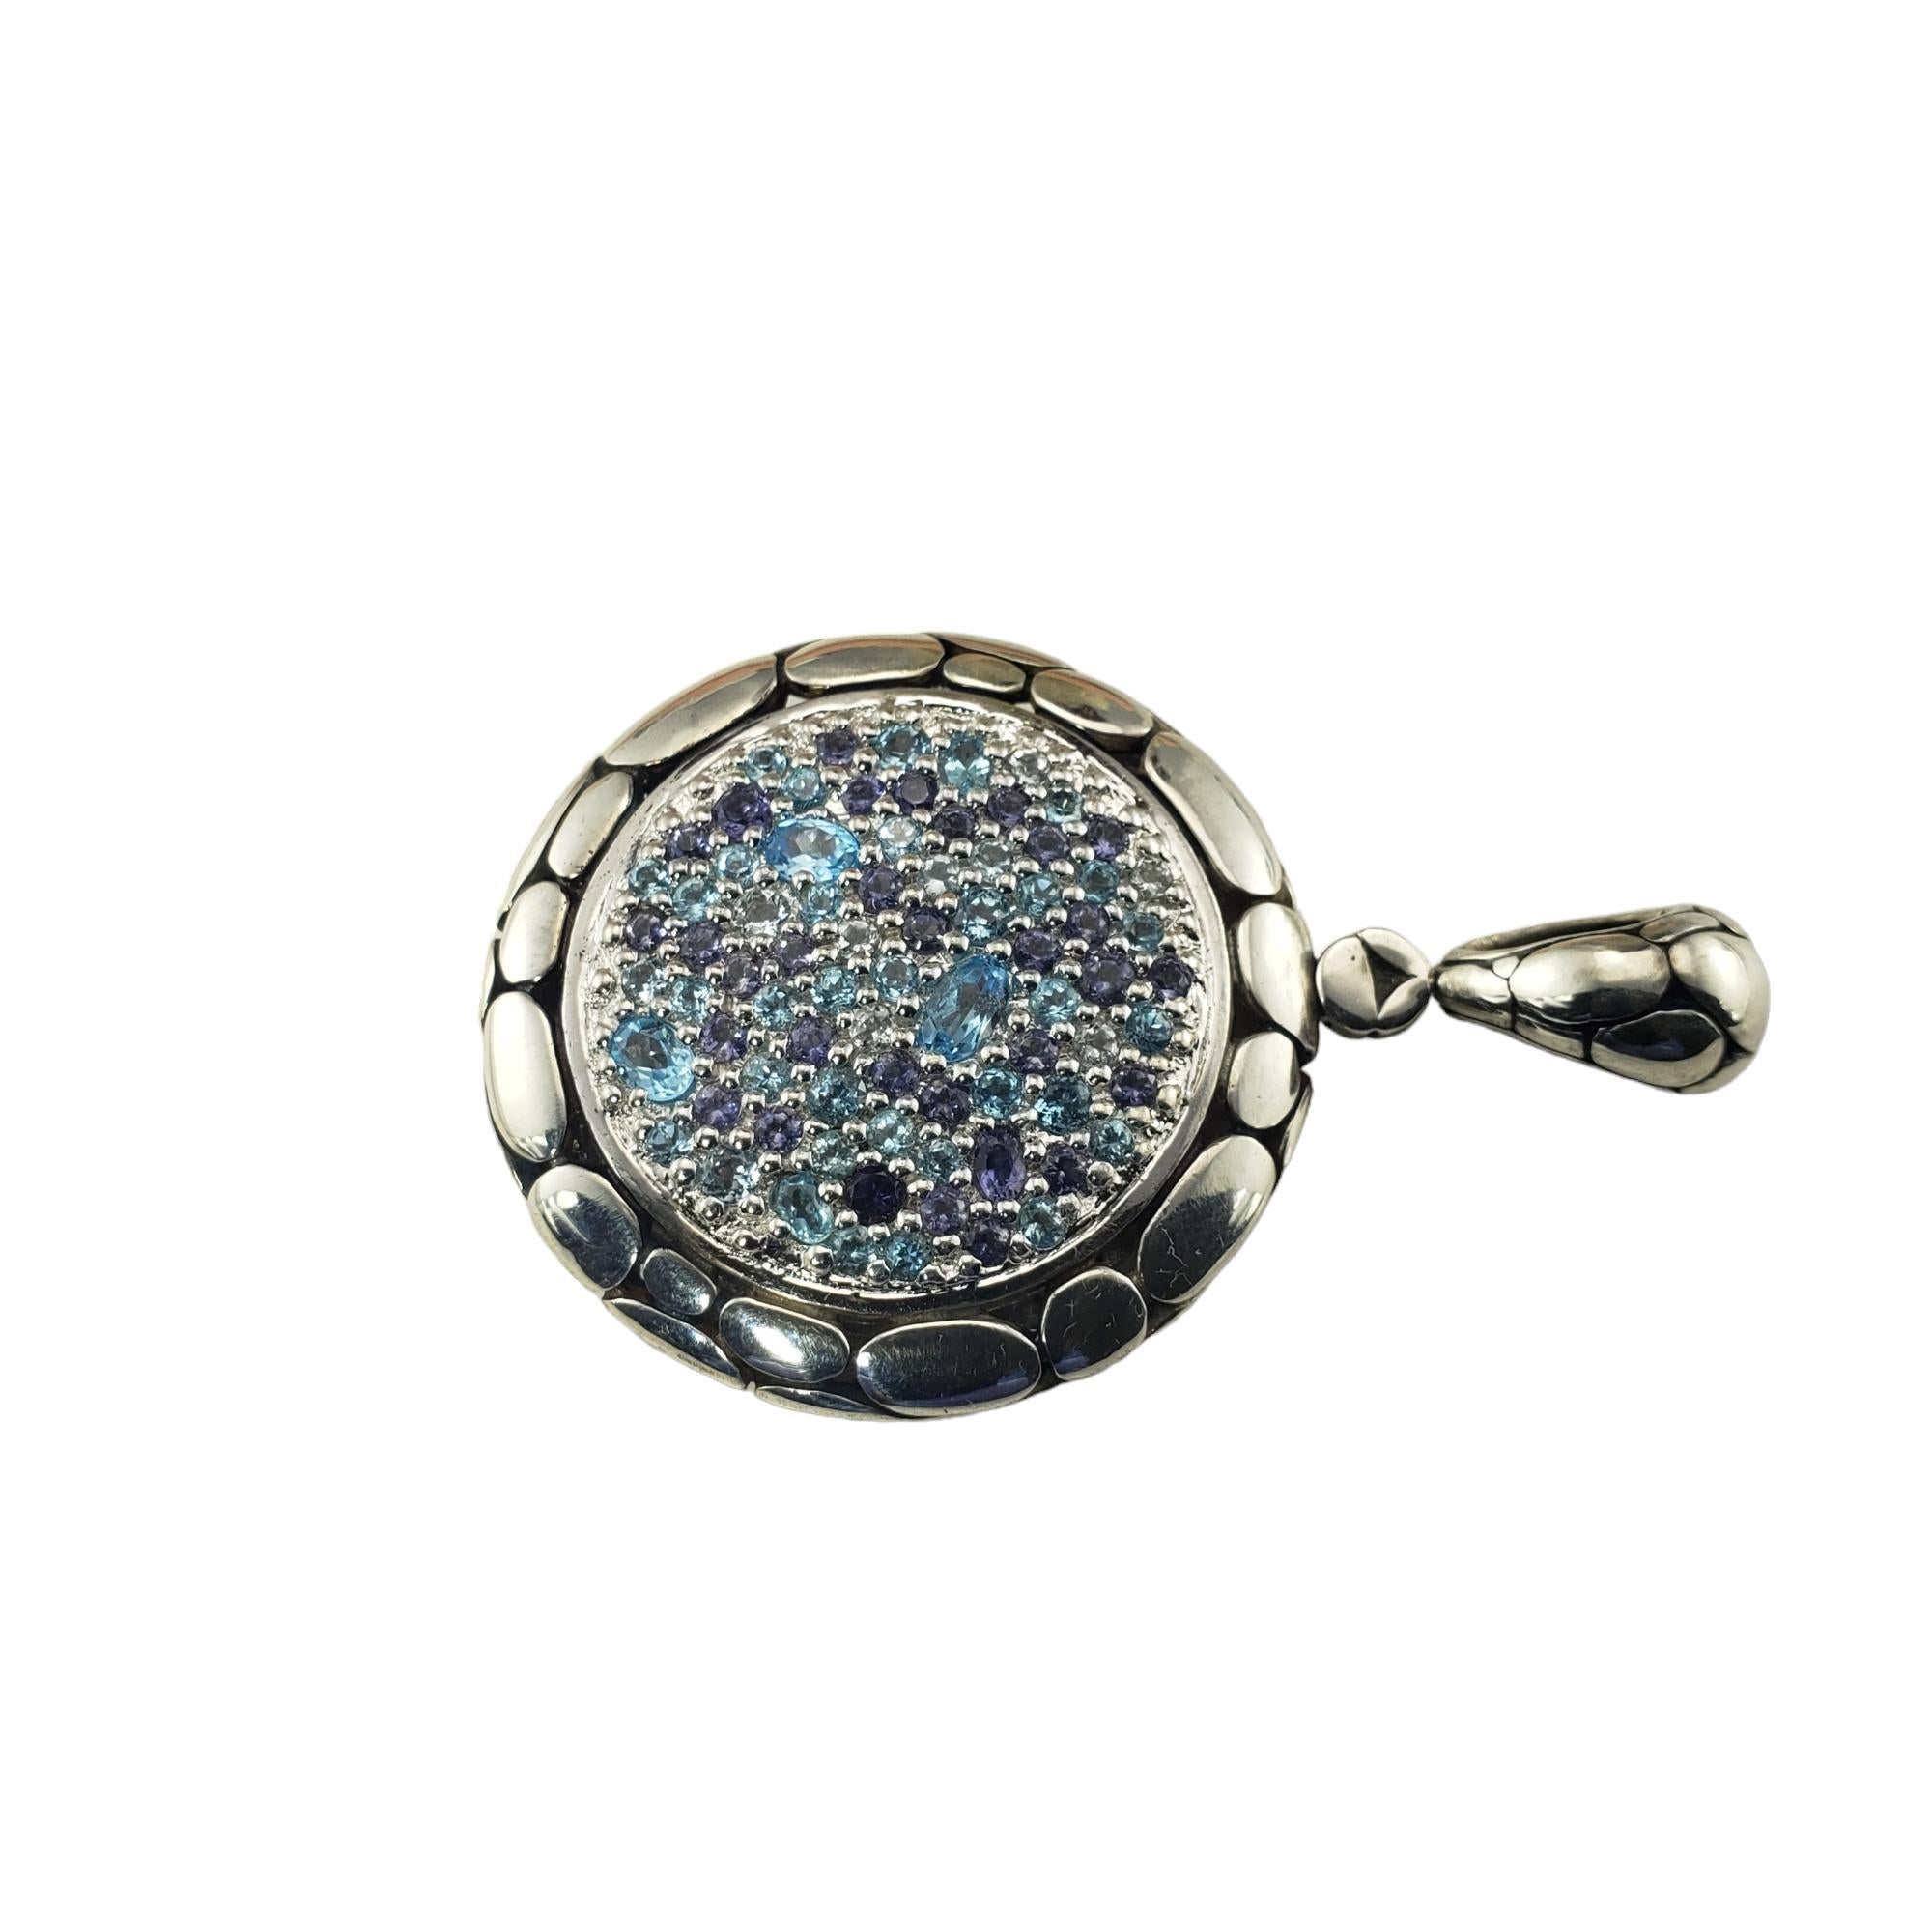 John Hardy Sterling Silver Kali Lavafire Sea Colorway Pendant-

This stunning pendant by John Hardy features 30 iolite gemstones, 40 aquamarine gemstones and nine blue topaz stones set in beautifully detailed sterling silver.

Size:  2.25 inches x